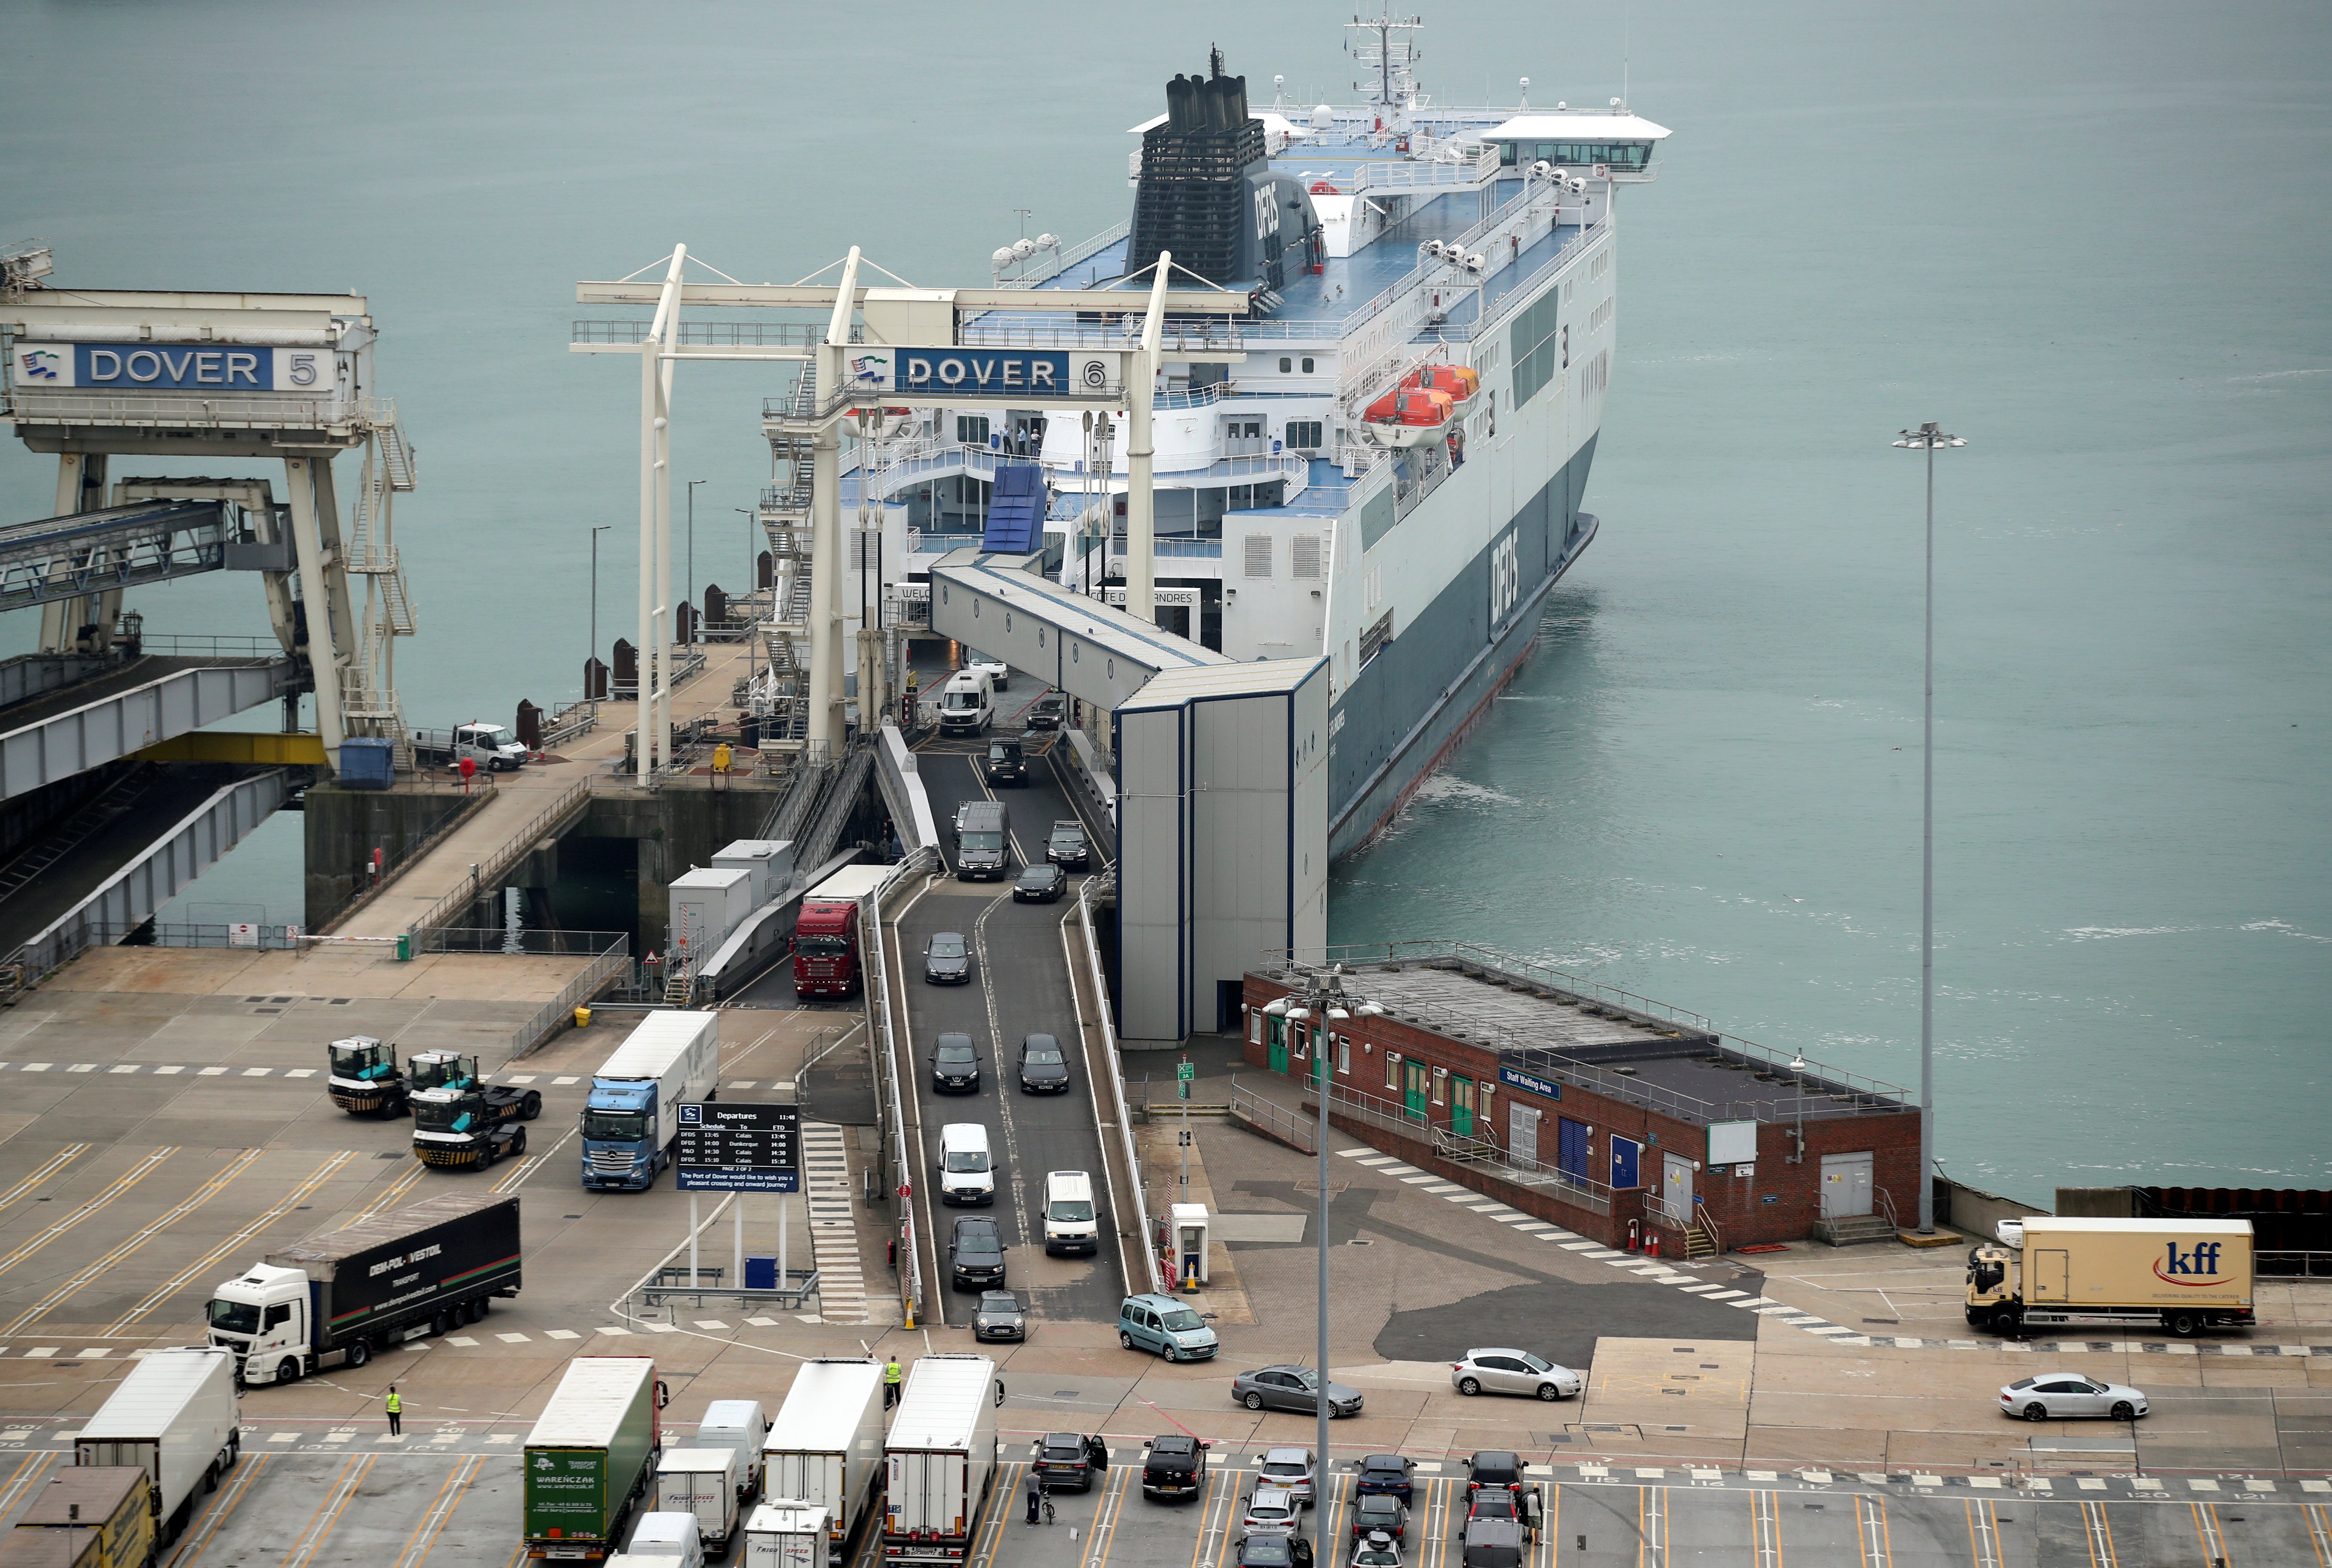 Cars and lorries disembark at Dover port